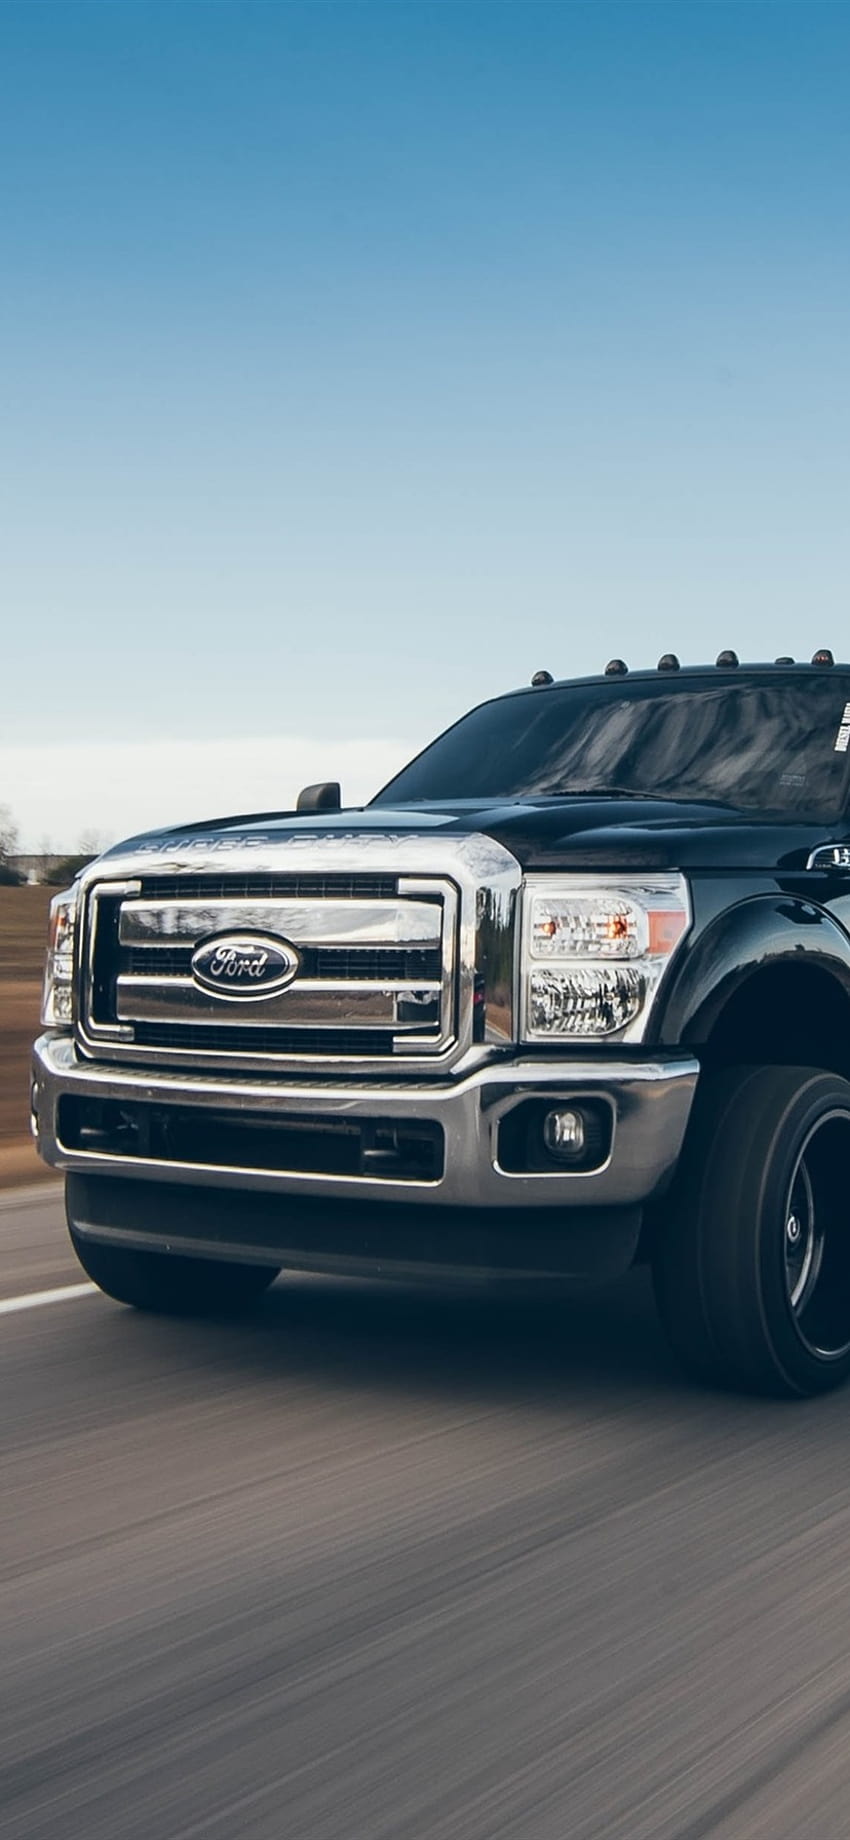 Ford pickup speed HD wallpapers